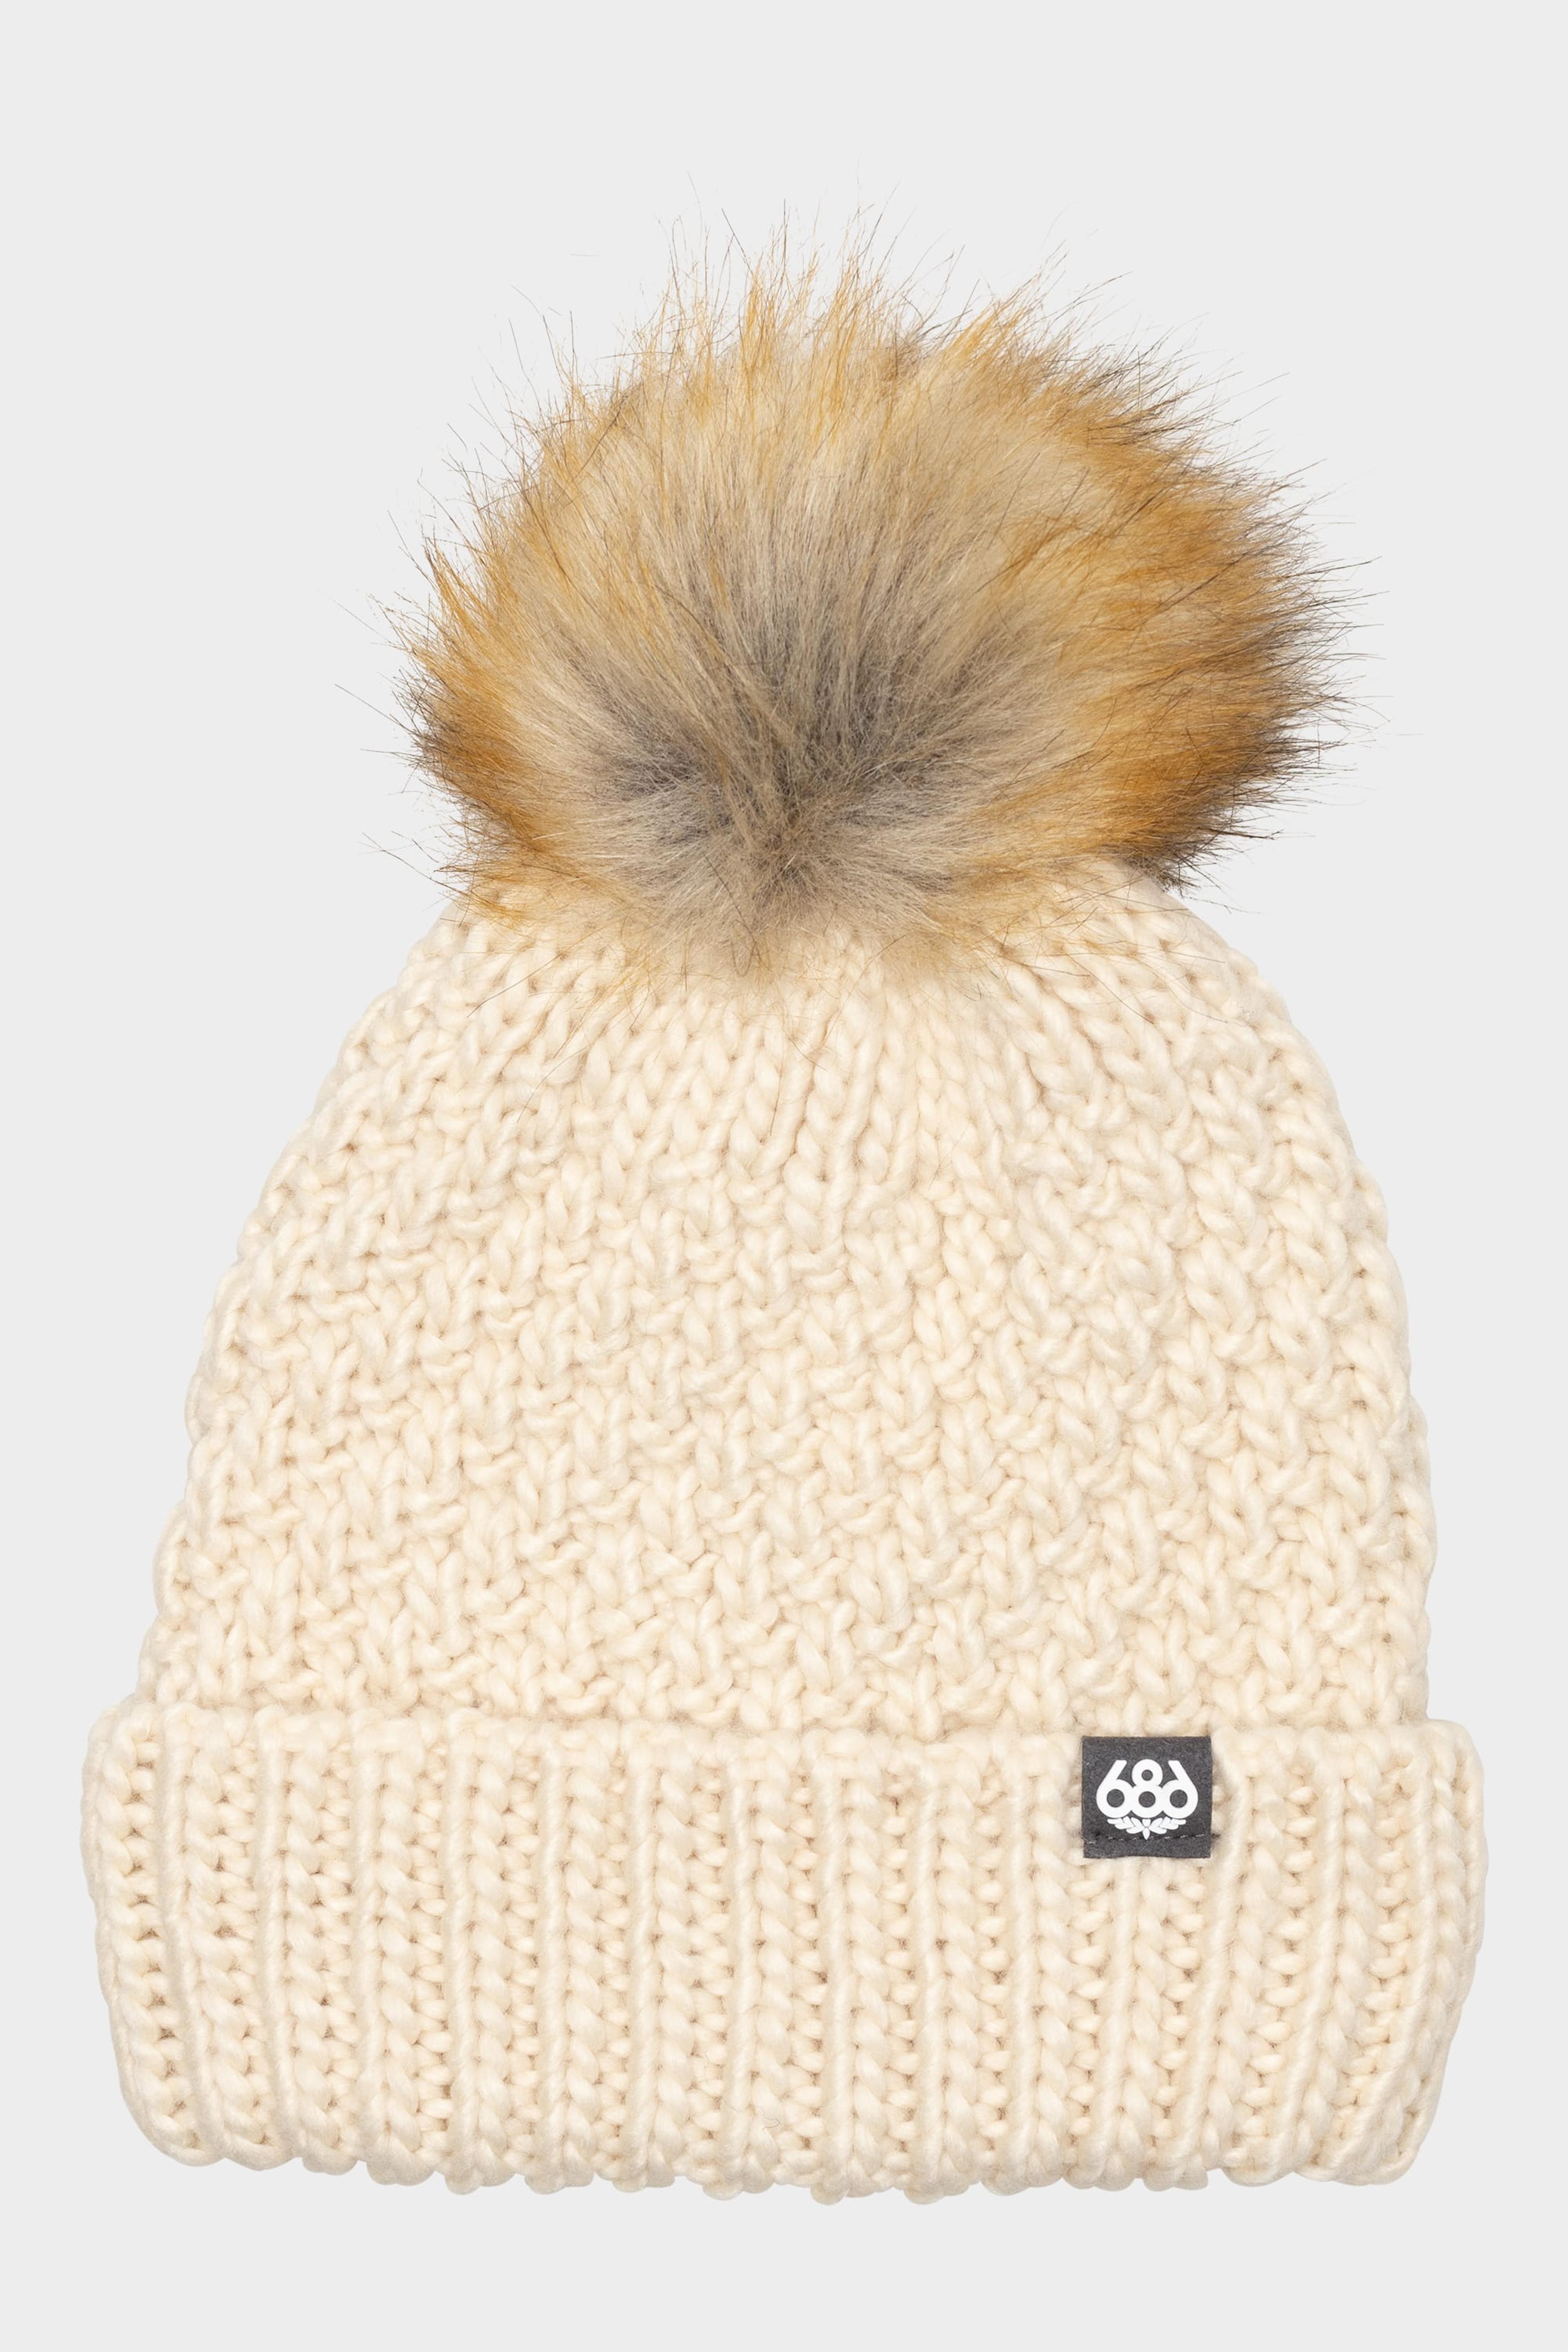 686 Women's Majesty Cable Knit Beanie